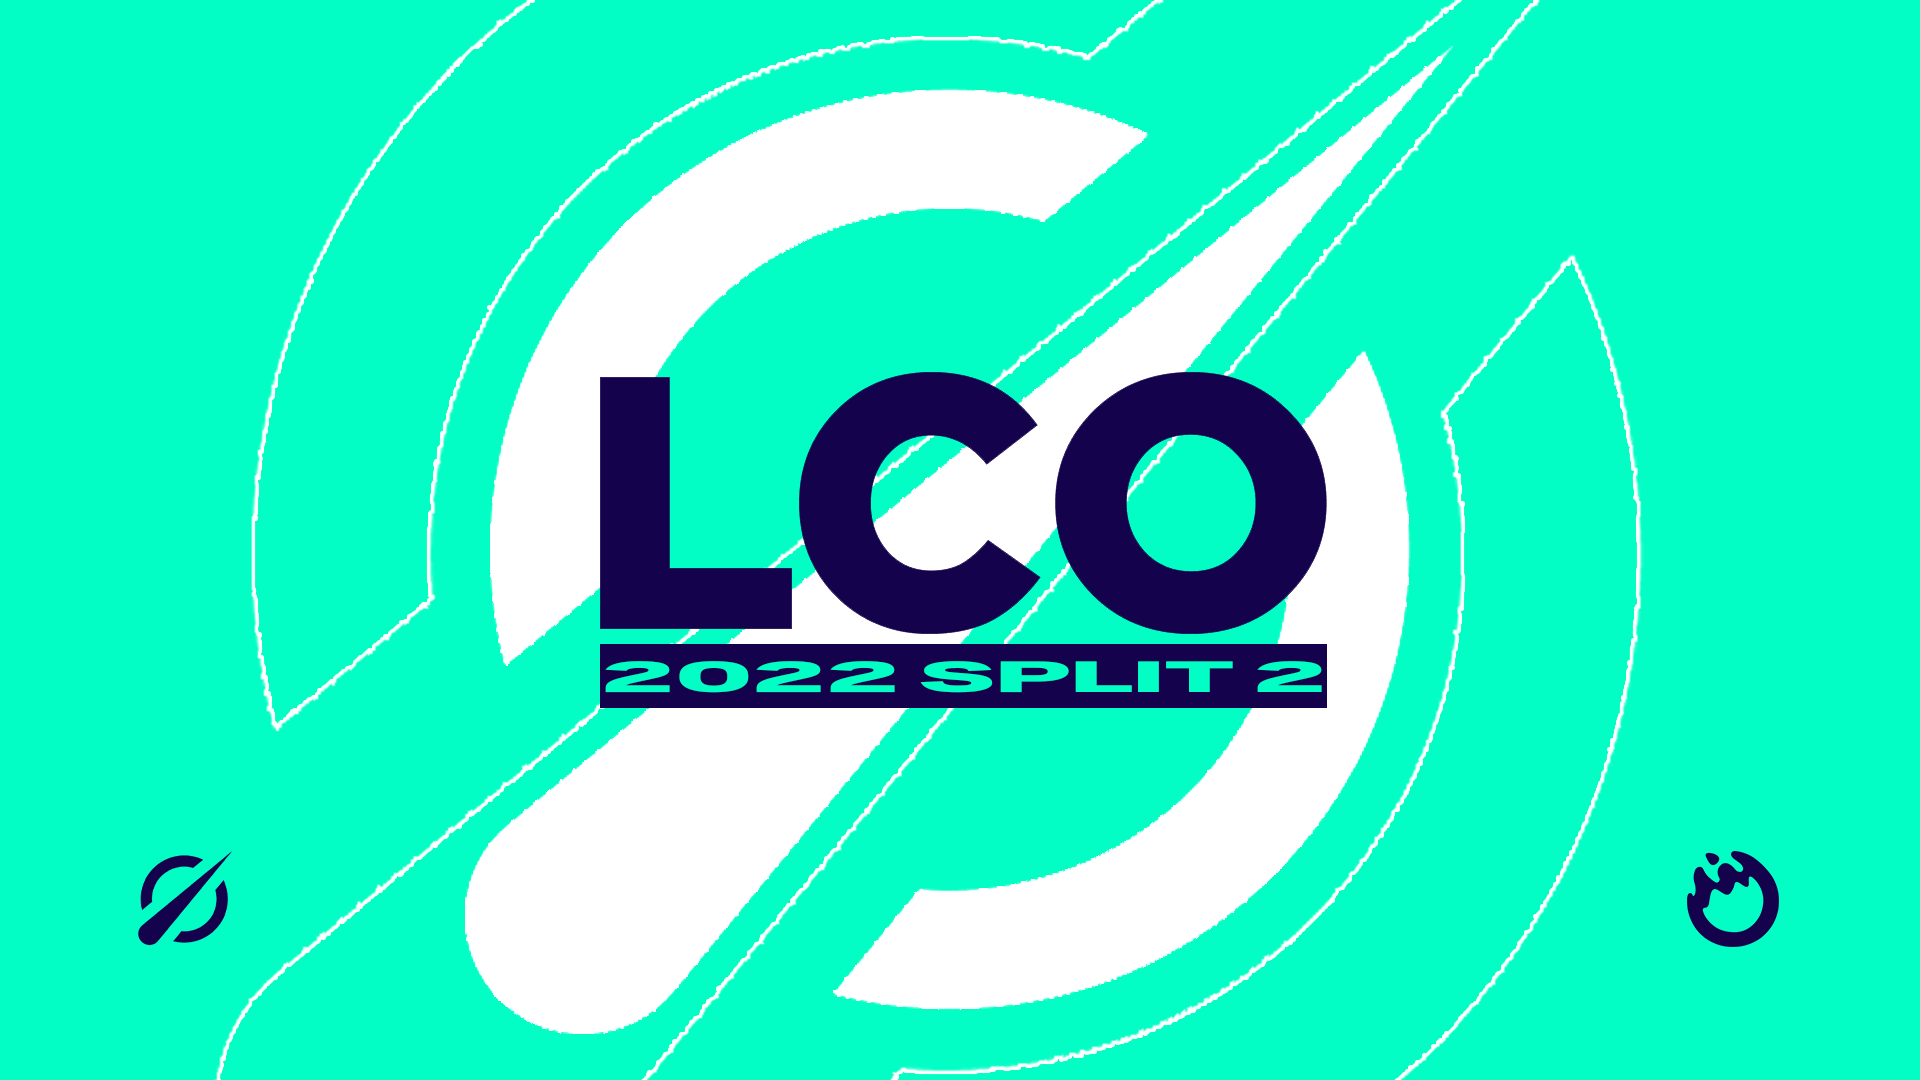 LCO 2022 Split 2: Second split of the year to kick off; stakes raised as ticket to Mexico City's Worlds up for grabs